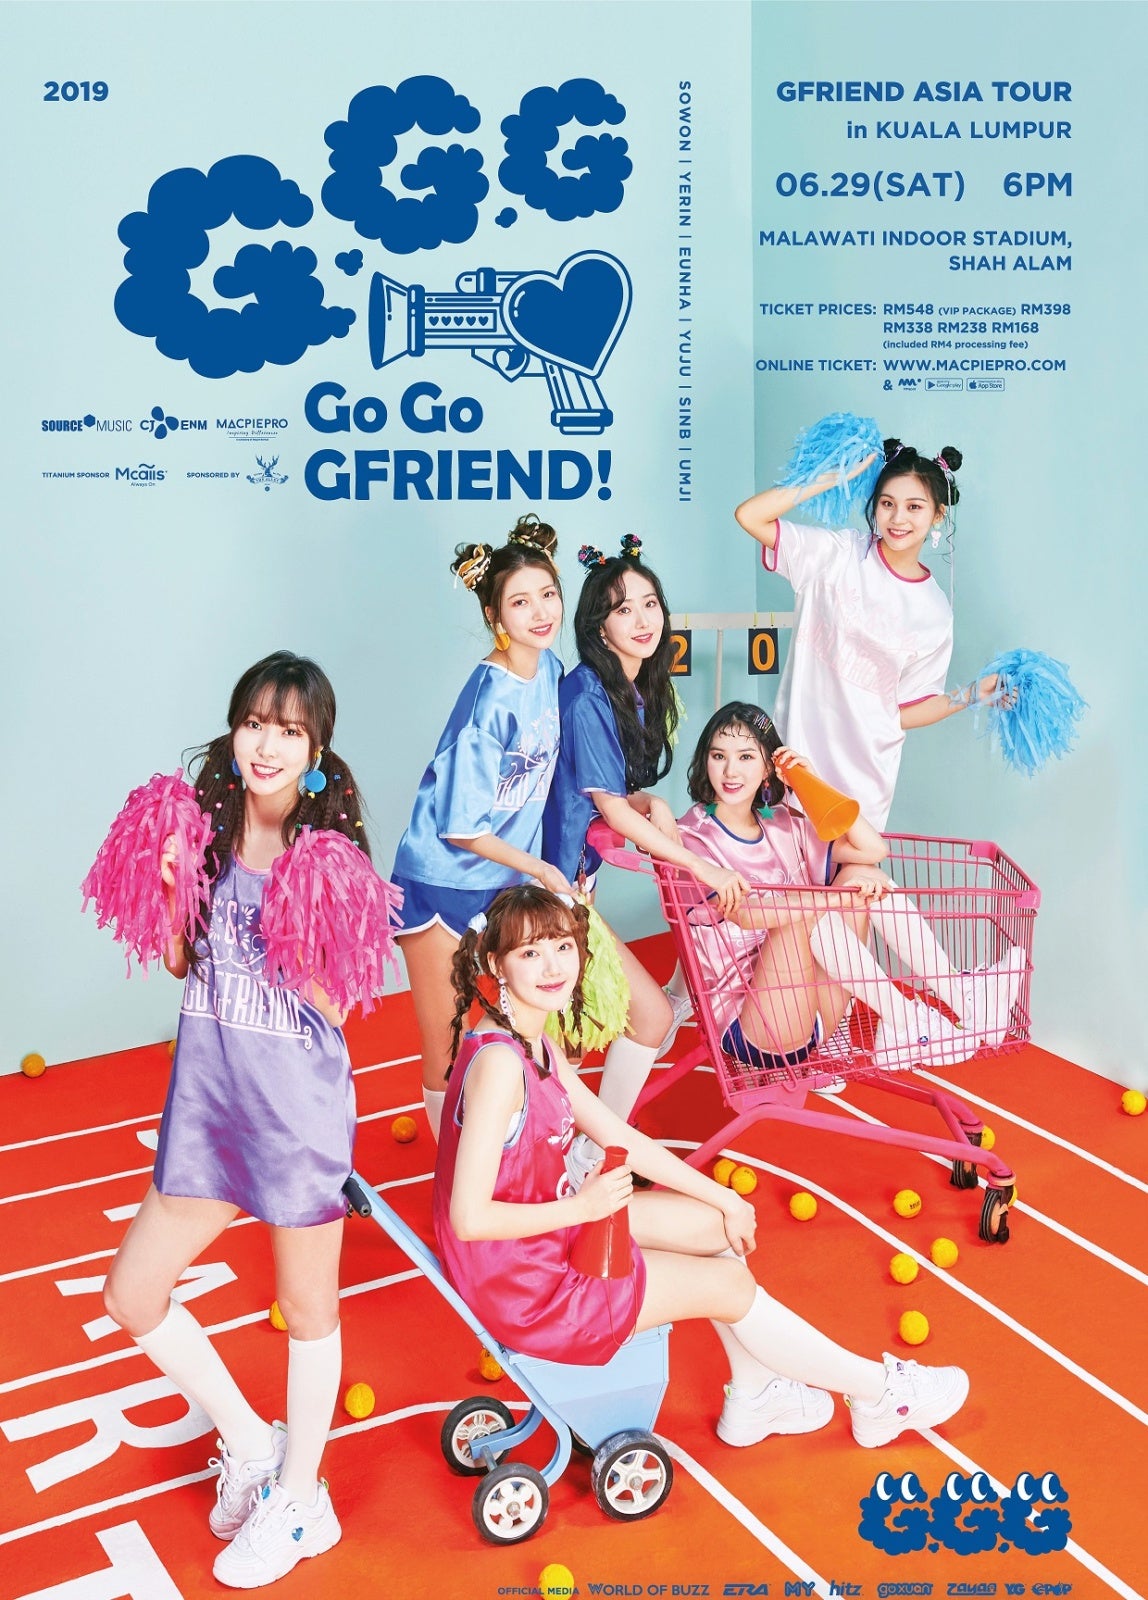 Popular K-Pop Group GFRIEND Is Coming to KL & Here's How To Get Up to 30% Off Tickets! - WORLD OF BUZZ